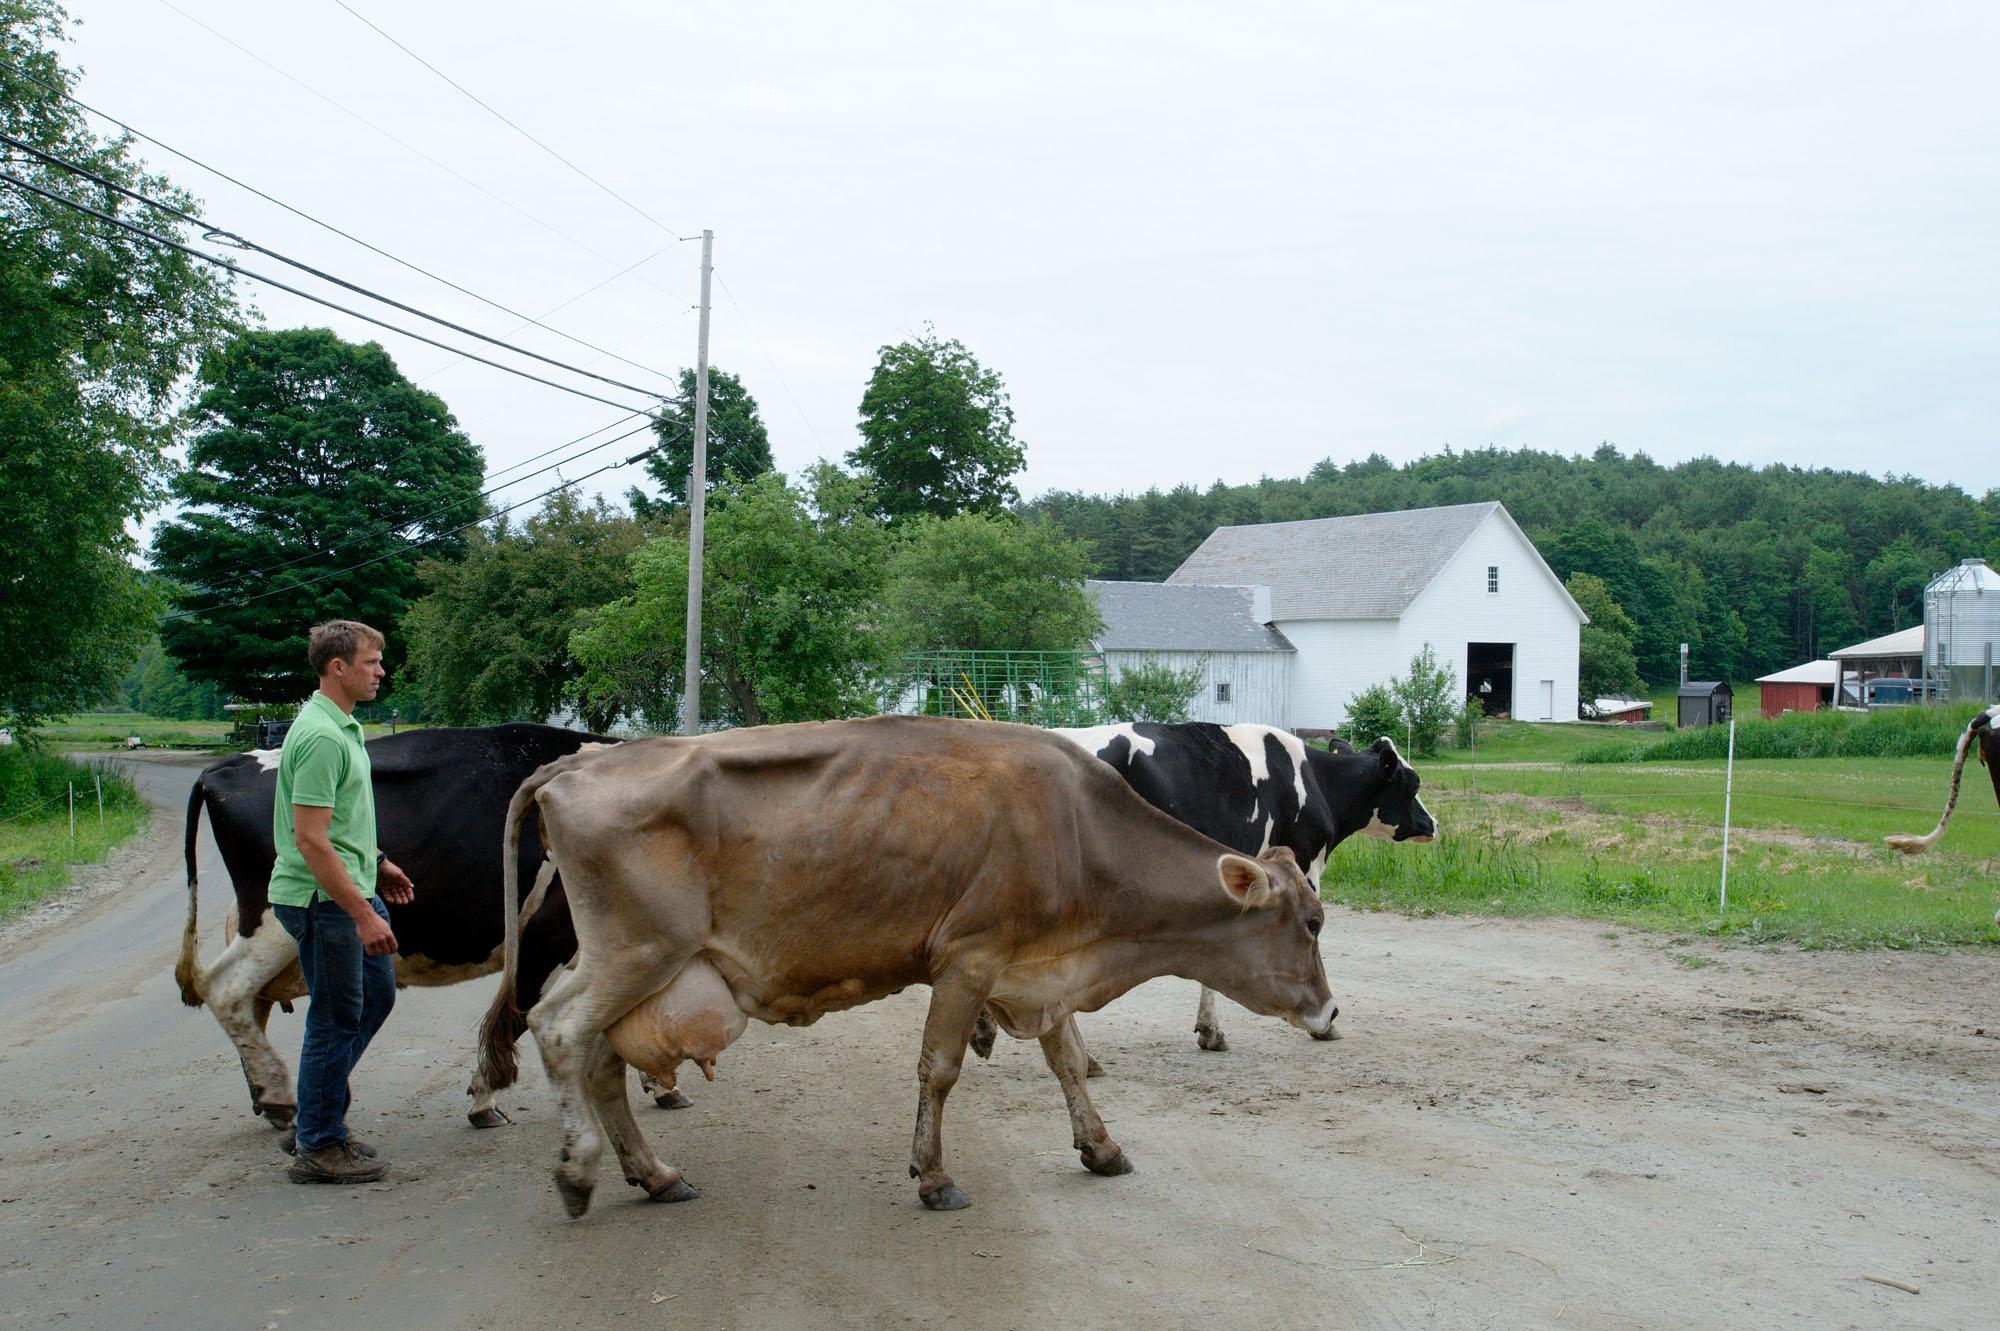 The Other Farm - Ross Thurber, third generation farmer, is accompanying...